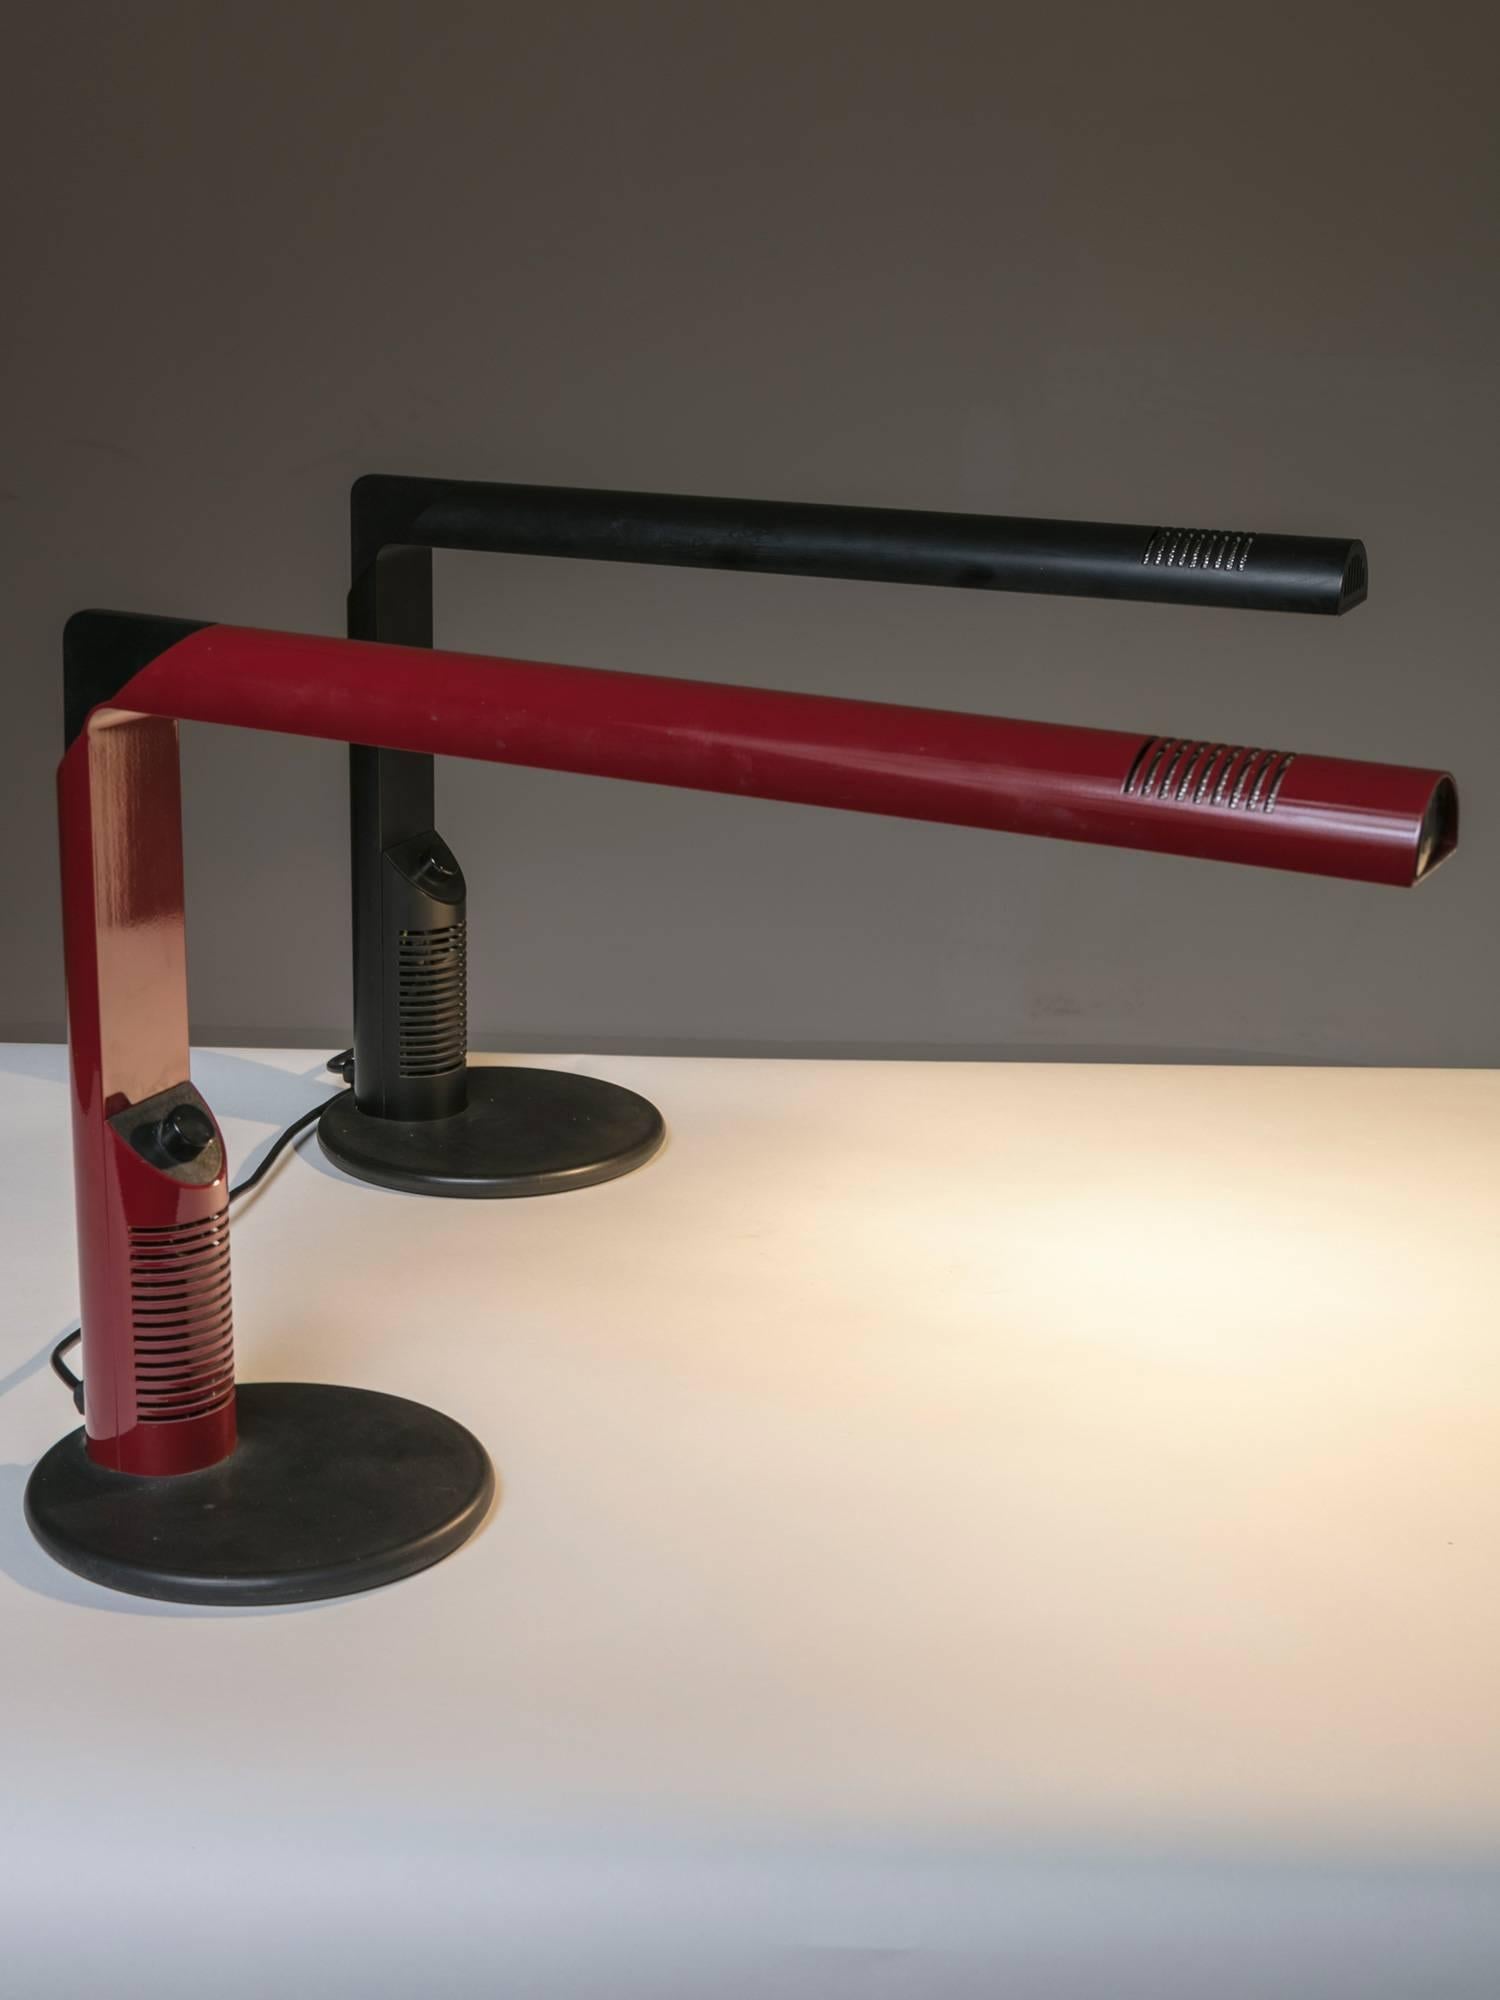 Abele table lamp with dimmer by Gianfranco Frattini for Luci.
Red lacquered aluminium and halogen light.